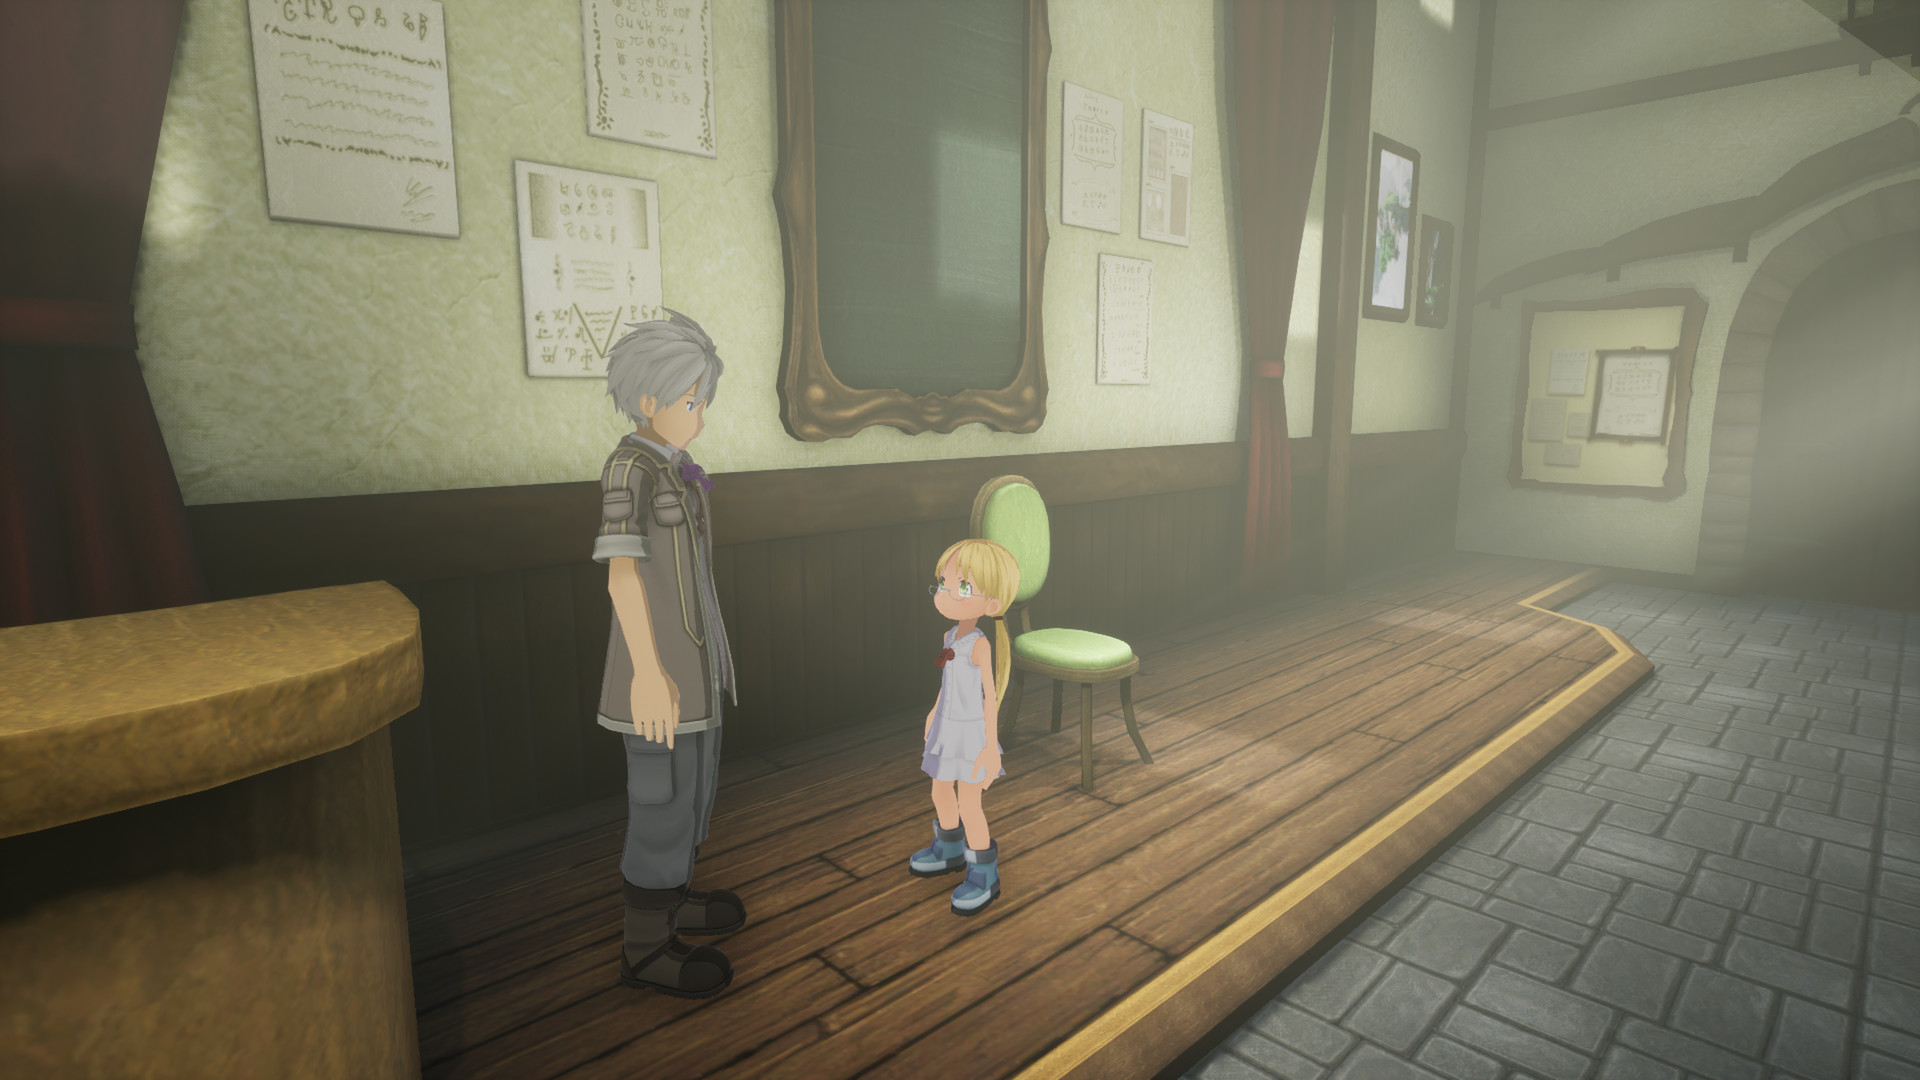 Made in Abyss: Binary Star Falling into Darkness Free Download